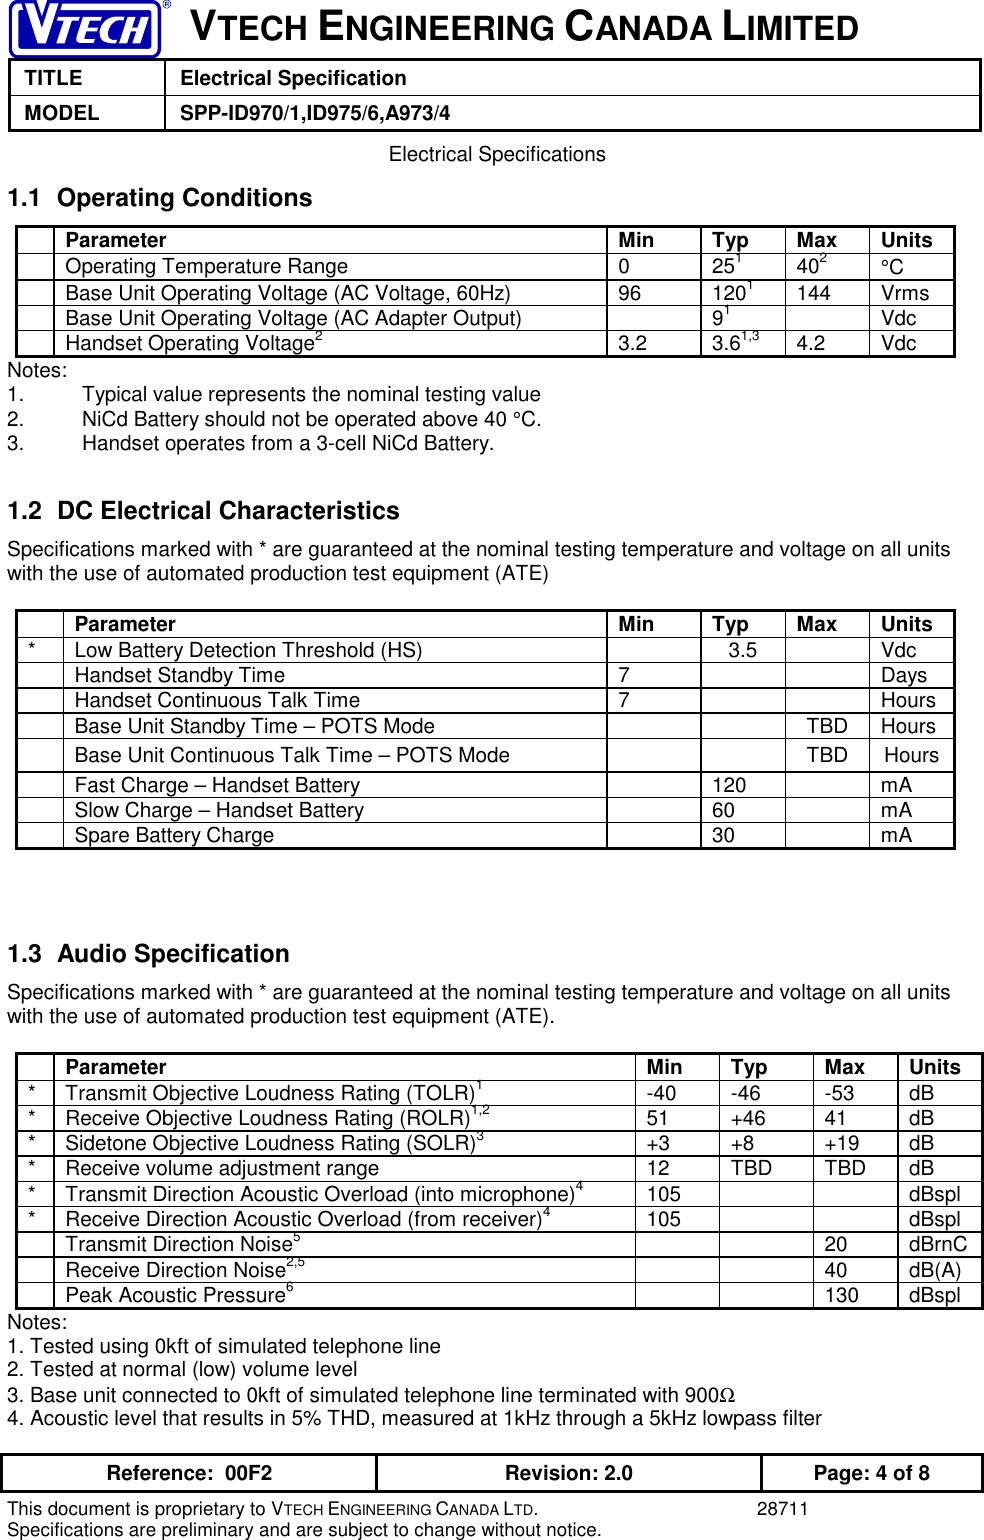 VTECH ENGINEERING CANADA LIMITEDTITLE Electrical SpecificationMODEL SPP-ID970/1,ID975/6,A973/4Reference:  00F2 Revision: 2.0 Page: 4 of 8This document is proprietary to VTECH ENGINEERING CANADA LTD. 28711Specifications are preliminary and are subject to change without notice. Electrical Specifications1.1 Operating ConditionsParameter Min Typ Max UnitsOperating Temperature Range 0 251402°CBase Unit Operating Voltage (AC Voltage, 60Hz) 96 1201144 VrmsBase Unit Operating Voltage (AC Adapter Output) 91VdcHandset Operating Voltage23.2 3.61,3 4.2 VdcNotes:1. Typical value represents the nominal testing value2.   NiCd Battery should not be operated above 40 °C.3. Handset operates from a 3-cell NiCd Battery.1.2  DC Electrical CharacteristicsSpecifications marked with * are guaranteed at the nominal testing temperature and voltage on all unitswith the use of automated production test equipment (ATE)Parameter Min Typ Max Units* Low Battery Detection Threshold (HS) 3.5 VdcHandset Standby Time 7 DaysHandset Continuous Talk Time 7 HoursBase Unit Standby Time – POTS Mode TBD HoursBase Unit Continuous Talk Time – POTS Mode TBD HoursFast Charge – Handset Battery 120 mASlow Charge – Handset Battery 60 mASpare Battery Charge 30 mA1.3 Audio SpecificationSpecifications marked with * are guaranteed at the nominal testing temperature and voltage on all unitswith the use of automated production test equipment (ATE).Parameter Min Typ Max Units* Transmit Objective Loudness Rating (TOLR)1-40 -46 -53 dB* Receive Objective Loudness Rating (ROLR)1,2 51 +46 41 dB* Sidetone Objective Loudness Rating (SOLR)3+3 +8 +19 dB* Receive volume adjustment range 12 TBD TBD dB* Transmit Direction Acoustic Overload (into microphone)4105 dBspl* Receive Direction Acoustic Overload (from receiver)4105 dBsplTransmit Direction Noise520 dBrnCReceive Direction Noise2,5 40 dB(A)Peak Acoustic Pressure6130 dBsplNotes:1. Tested using 0kft of simulated telephone line2. Tested at normal (low) volume level3. Base unit connected to 0kft of simulated telephone line terminated with 900Ω4. Acoustic level that results in 5% THD, measured at 1kHz through a 5kHz lowpass filter